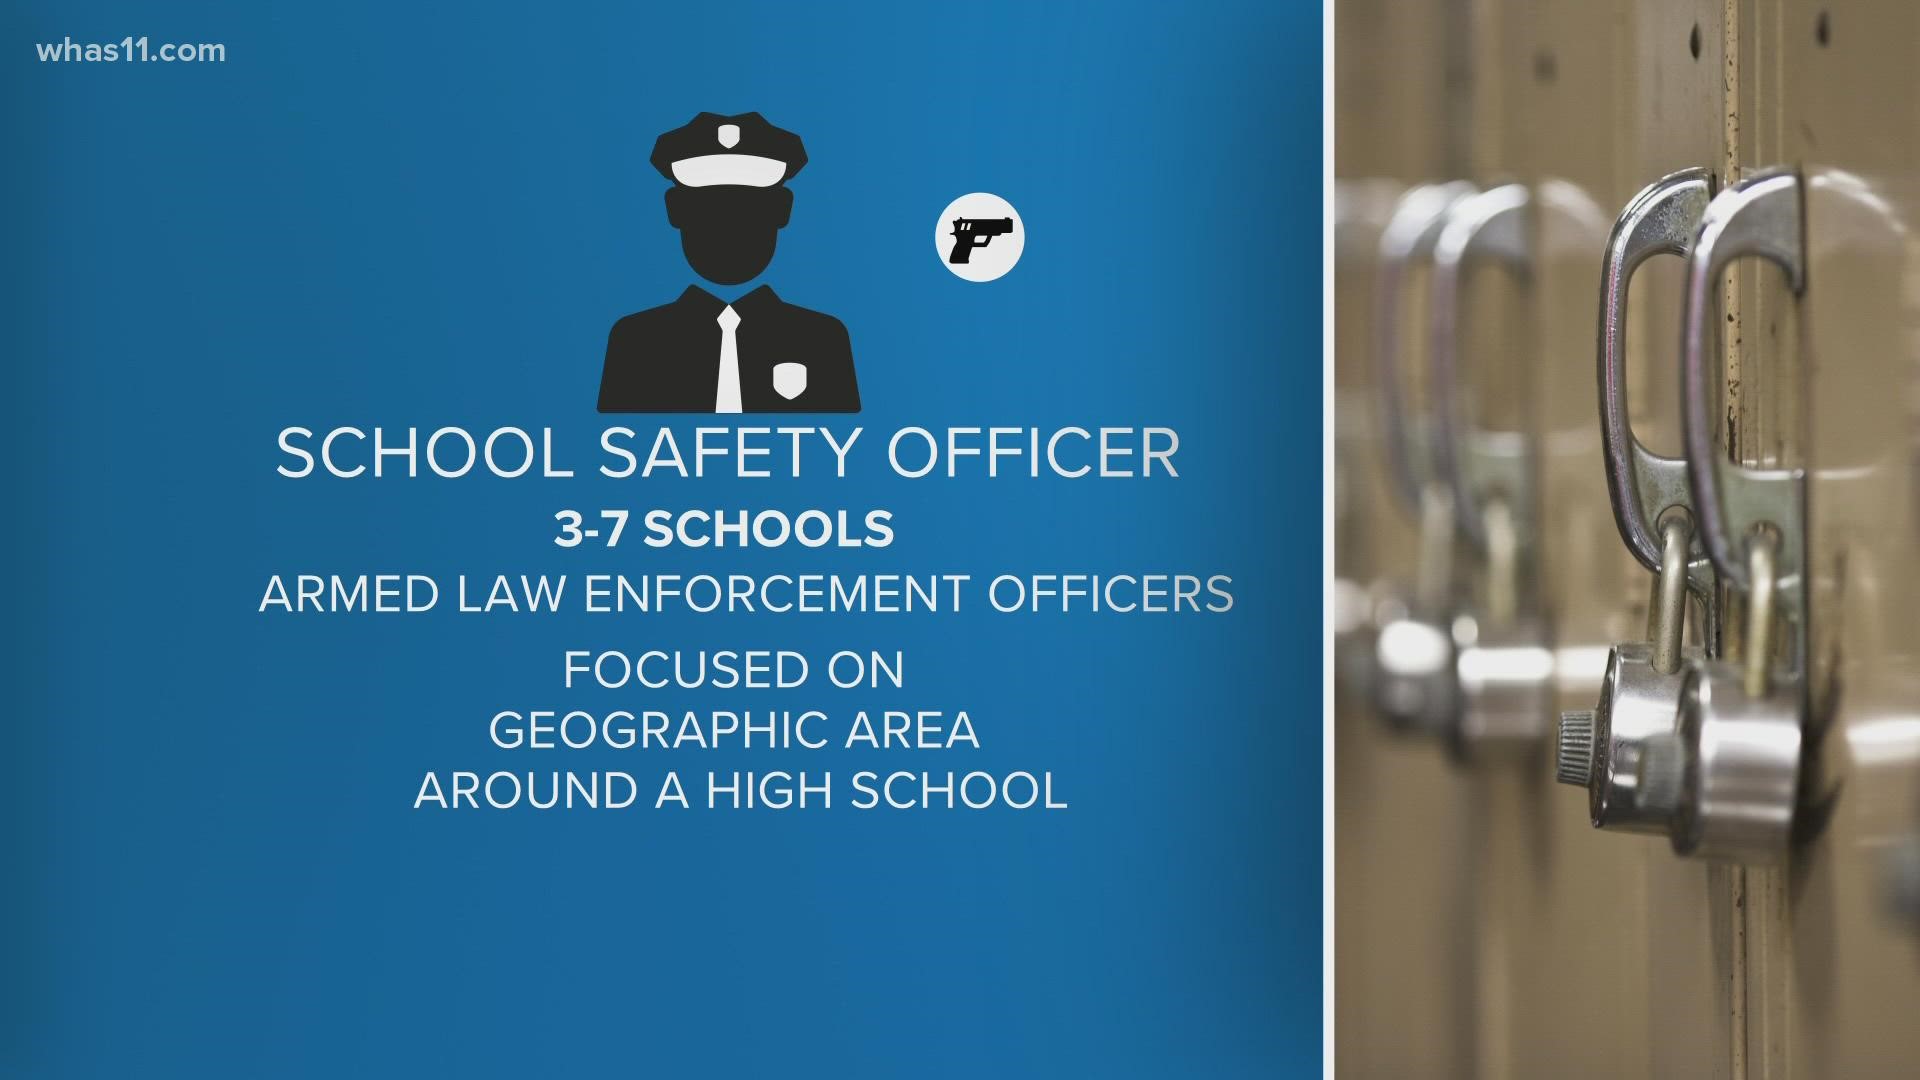 One safety administrator will be assigned to each middle and high school. Armed school safety officers will be assigned to 3-7 schools in a geographic area.